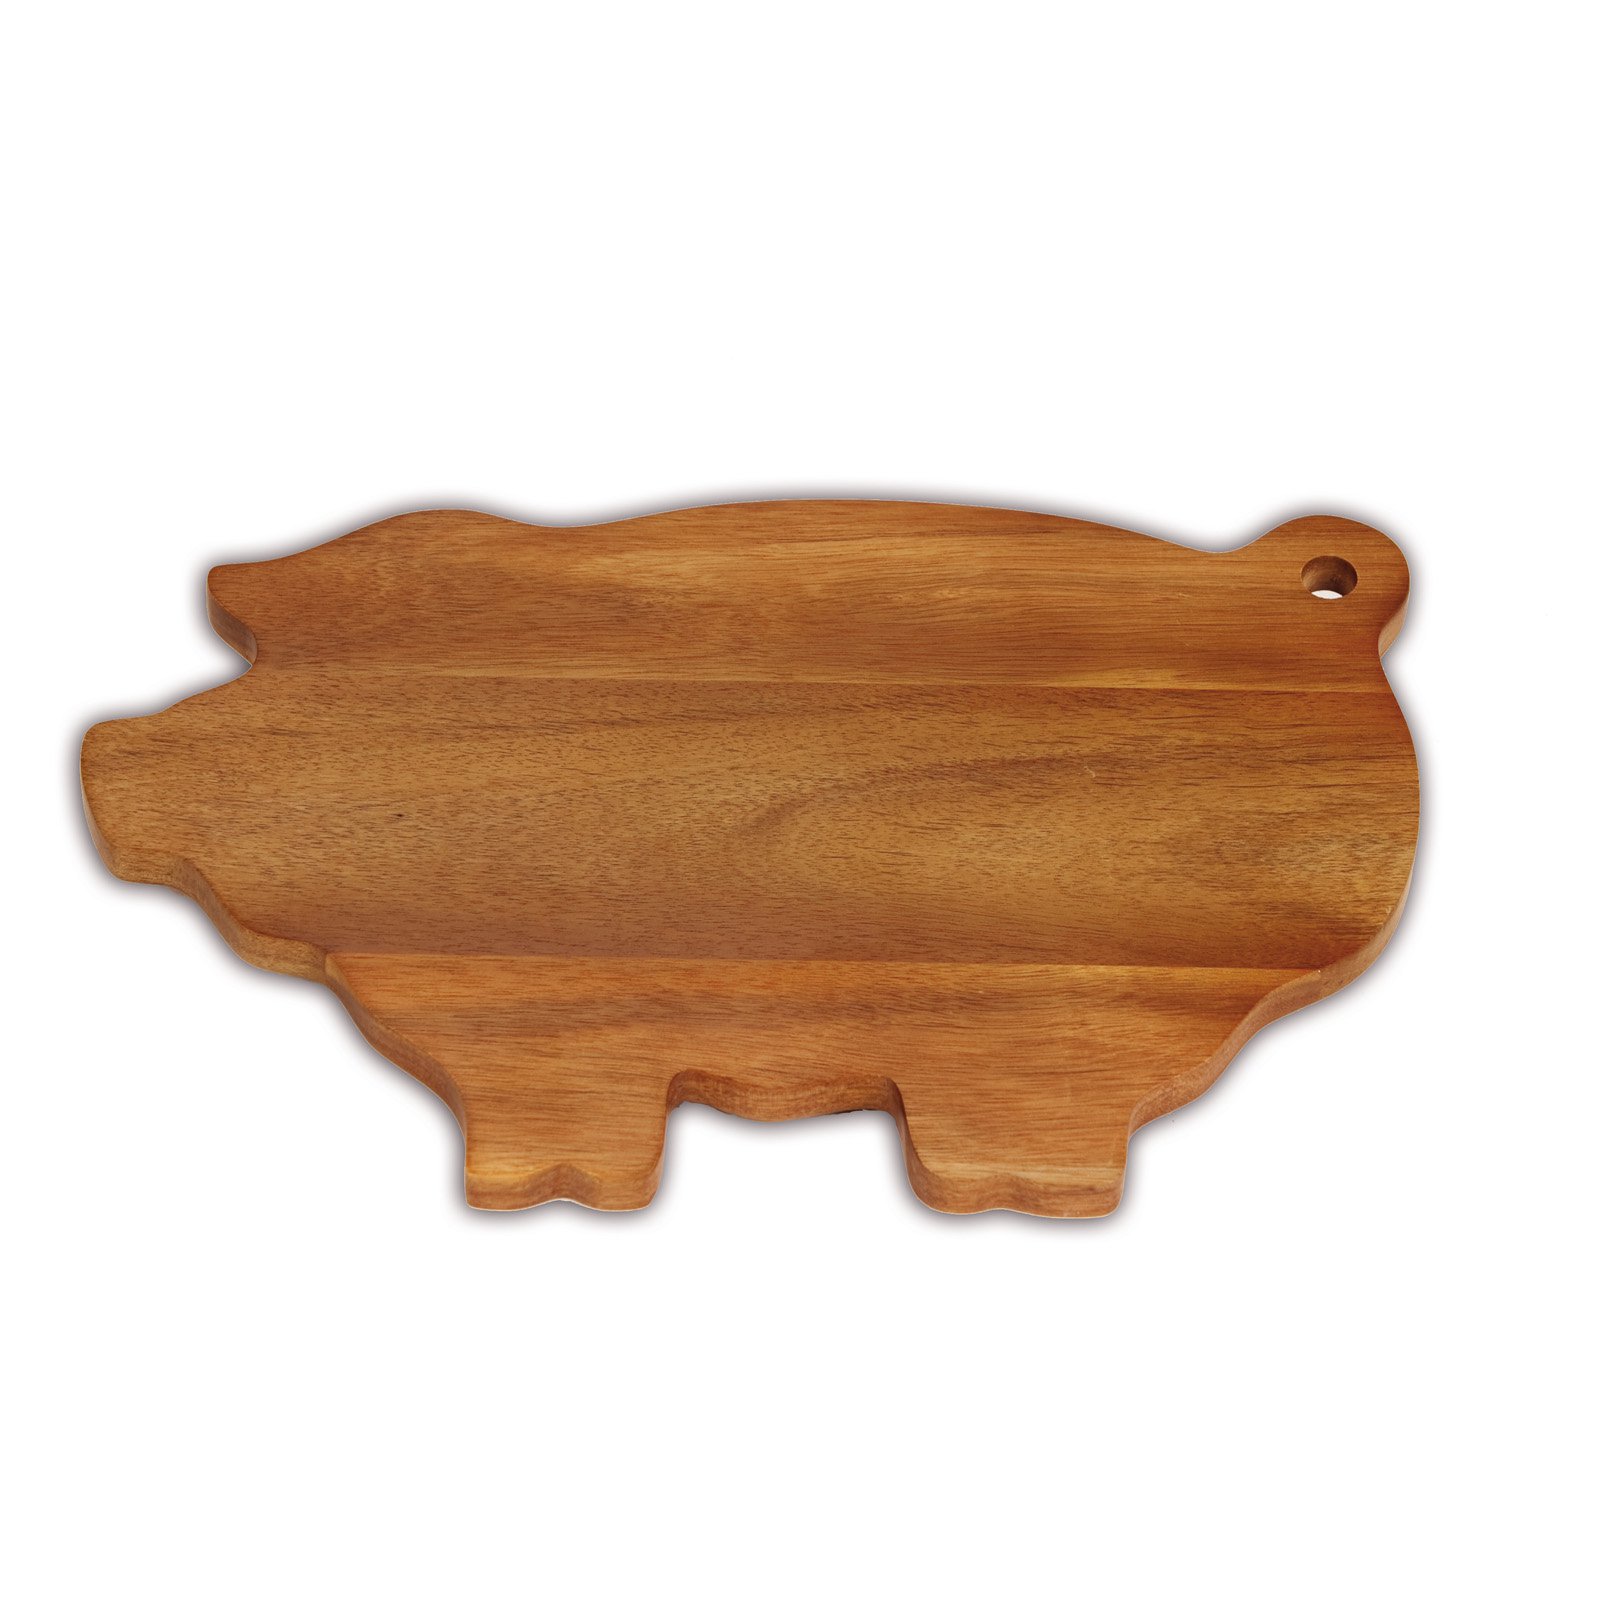 Picnic Plus Pig Shaped Cutting Board - image 1 of 2